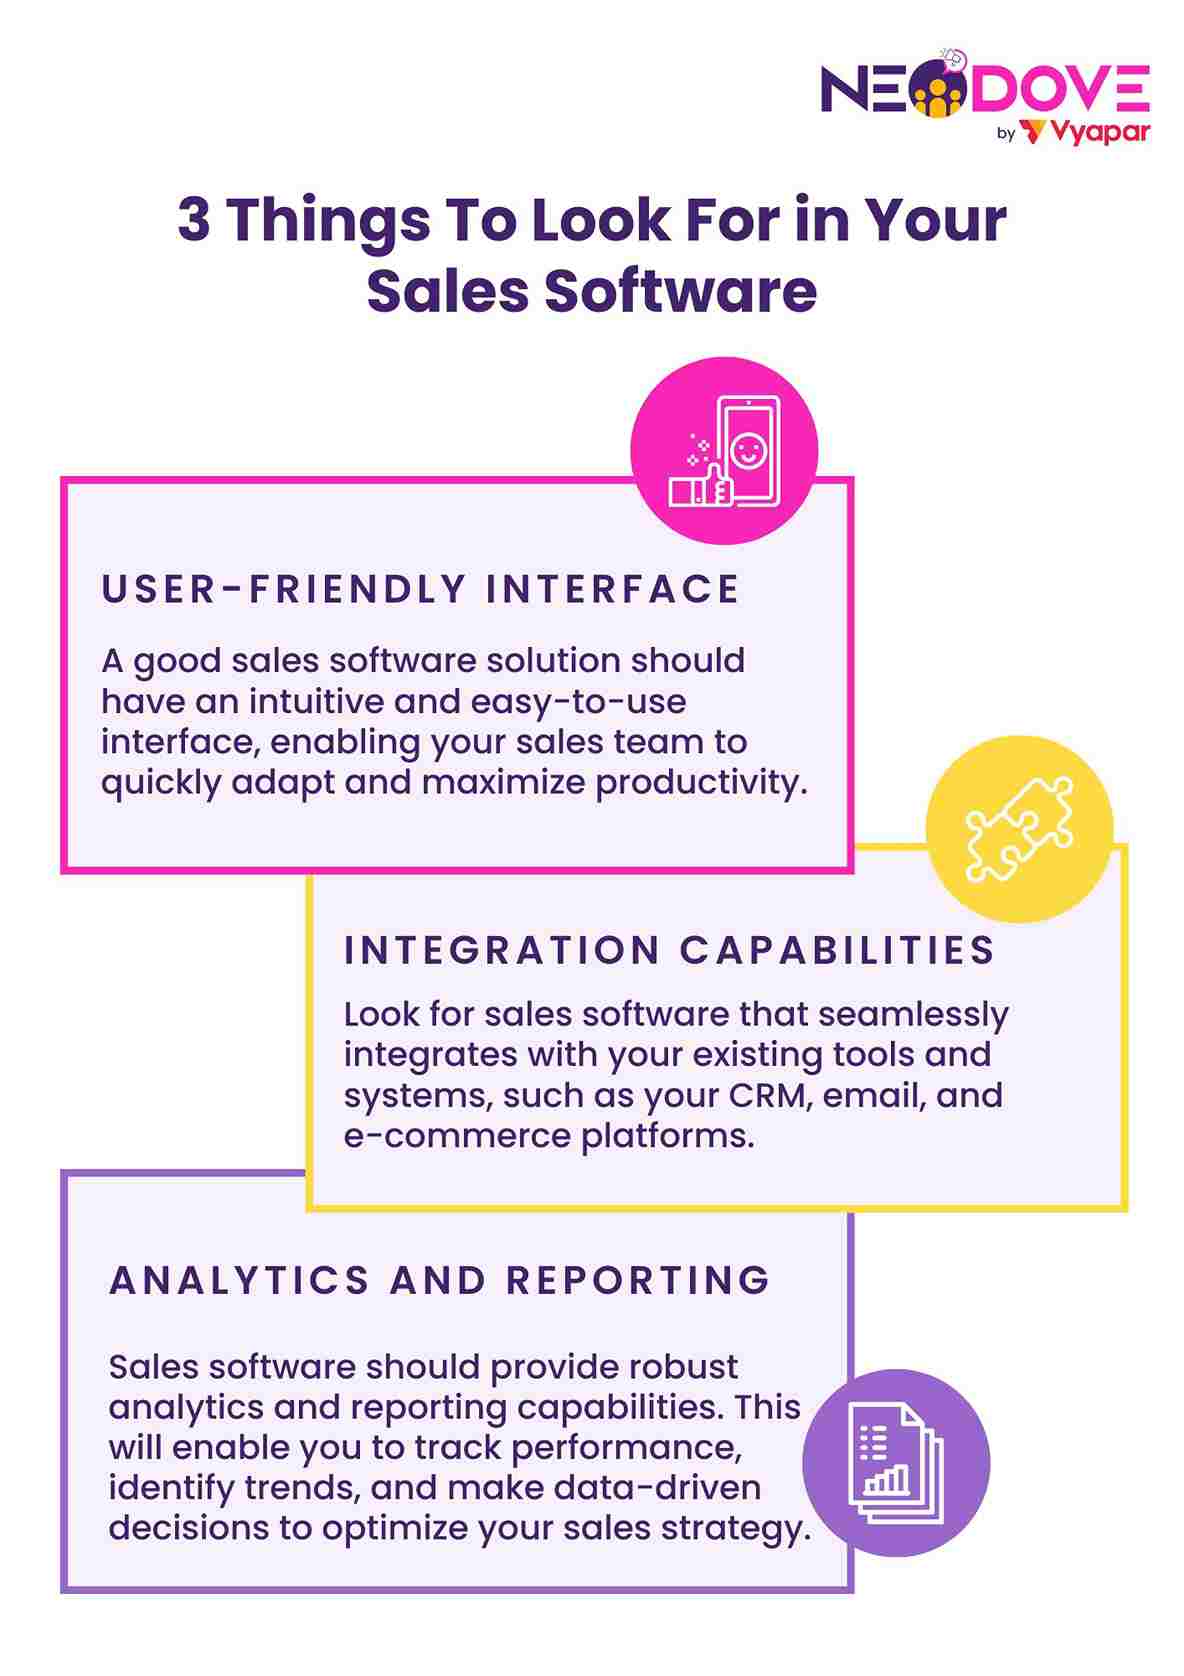 3 Things to Look For In Your Sales Software - NeoDove